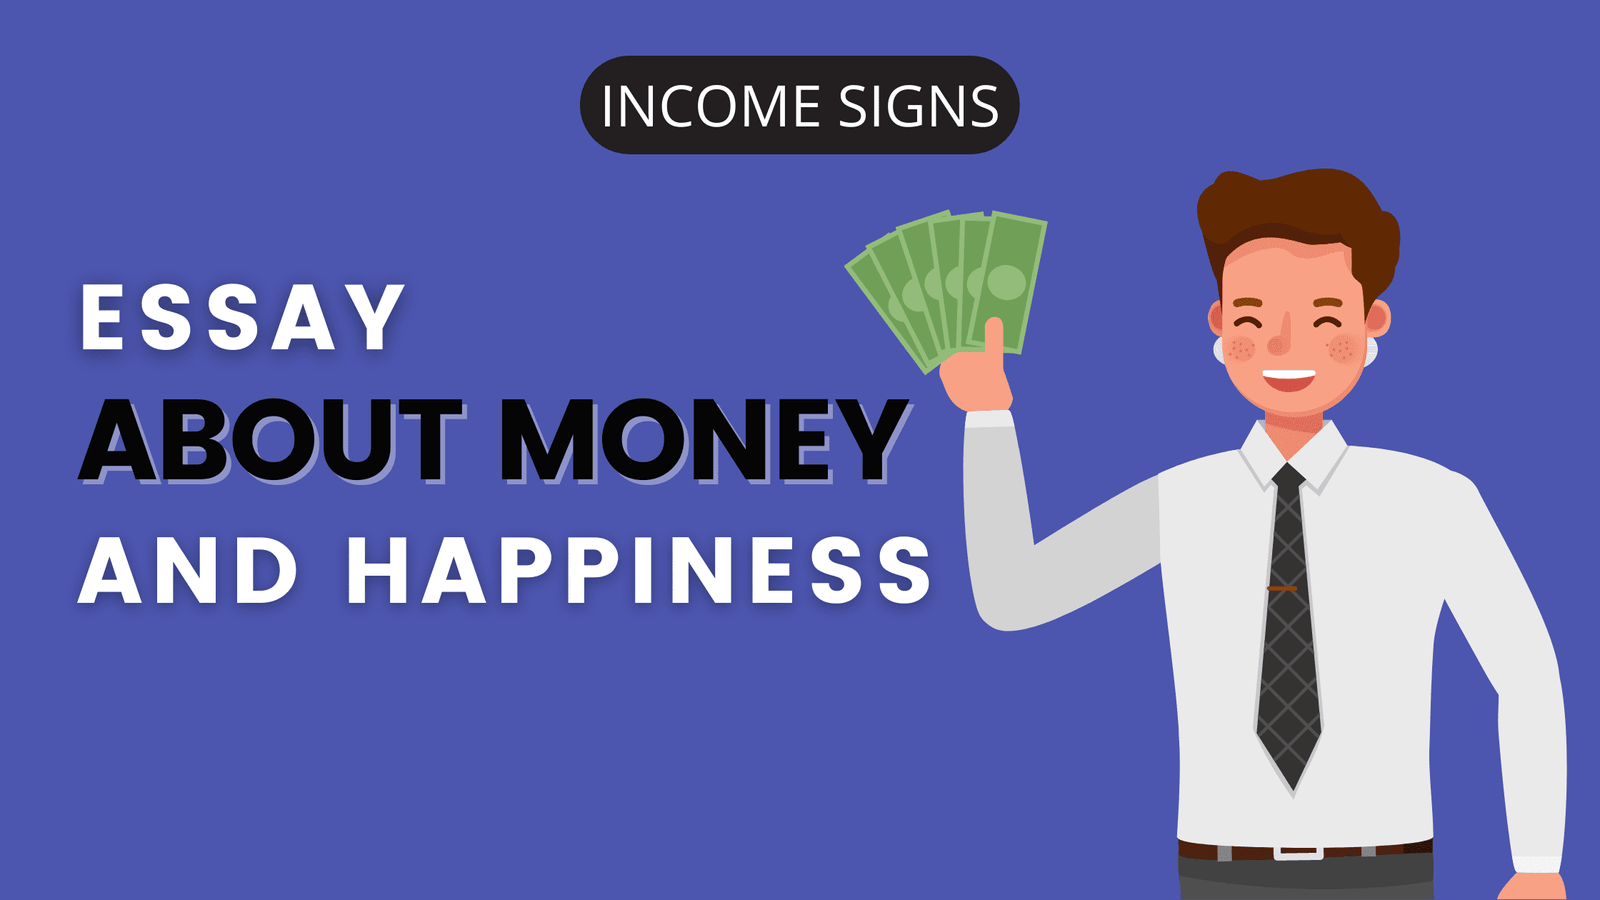 Essay About Money and Happiness - Income Signs